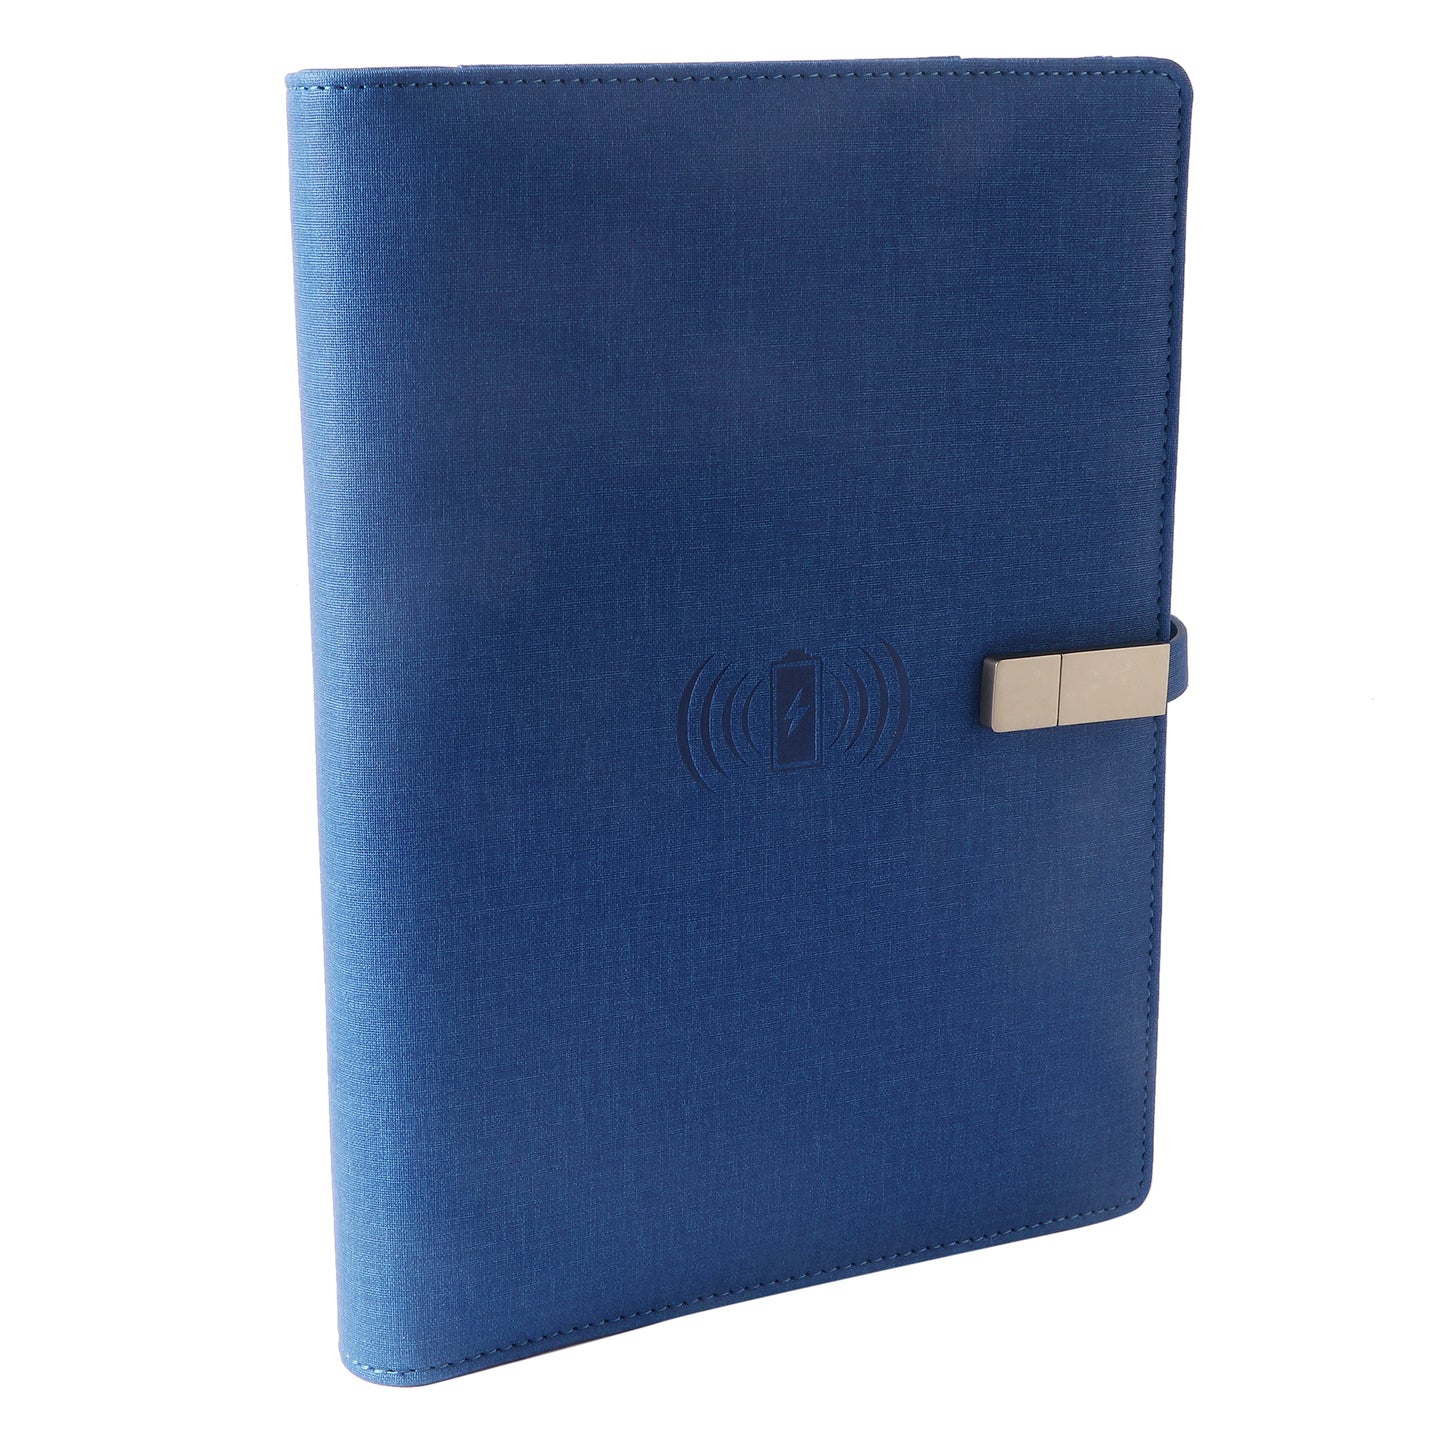 Personalized Blue Jute 8000mAh Notebook Diary Power Bank with 16gb Pen Drive - For Office Use, Personal Use, Return Gift, or Corporate Gifting - HK10103